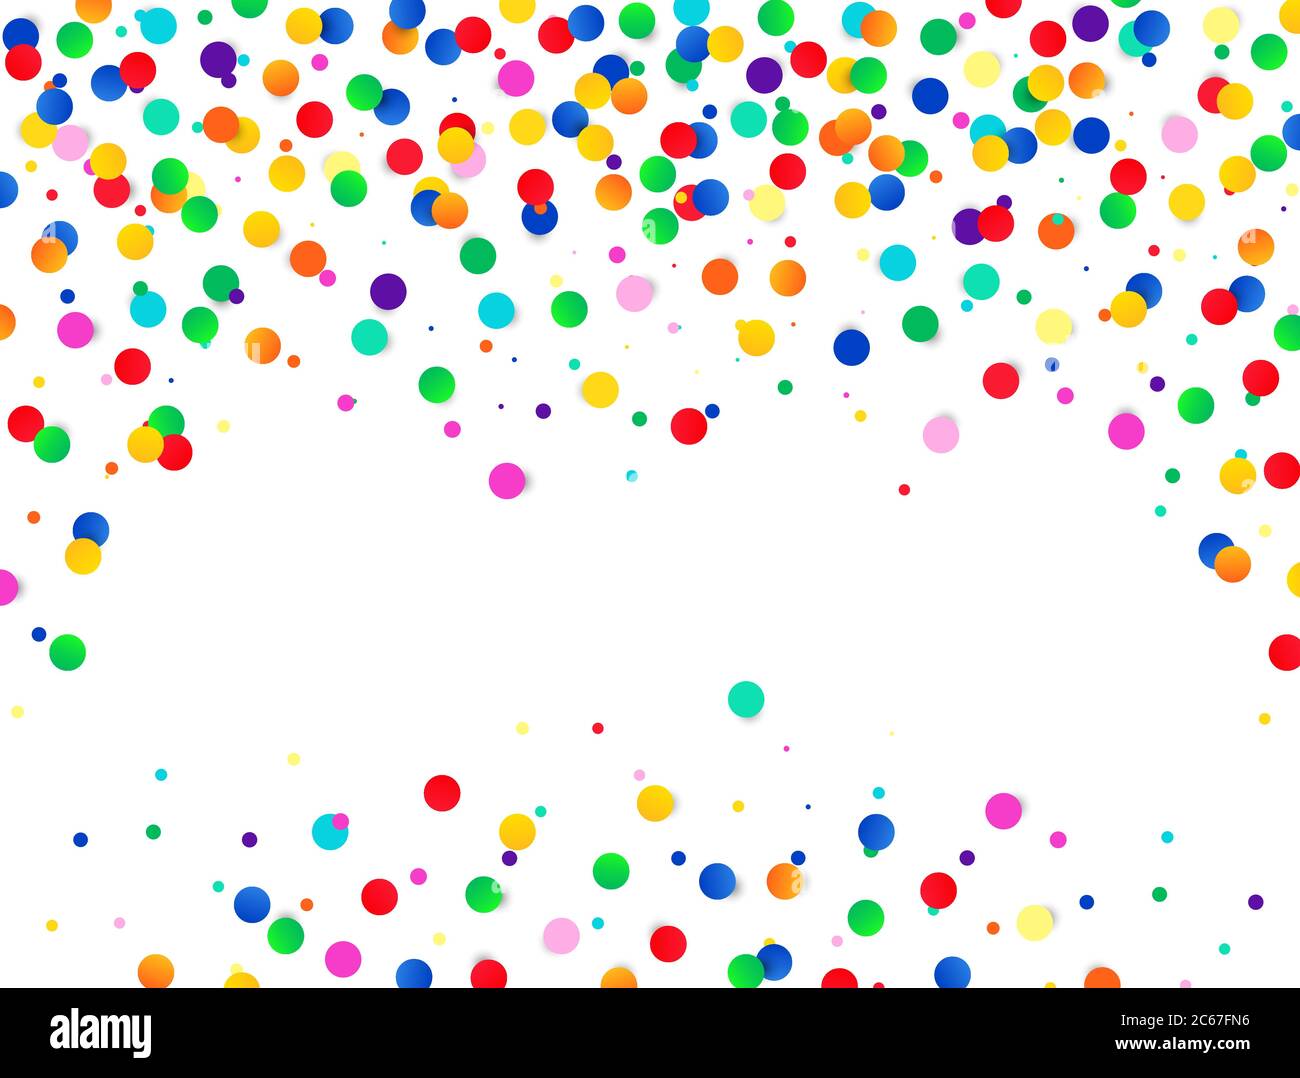 Colorful vector confetti background isolated on the white. Vector holiday illustration. Stock Vector